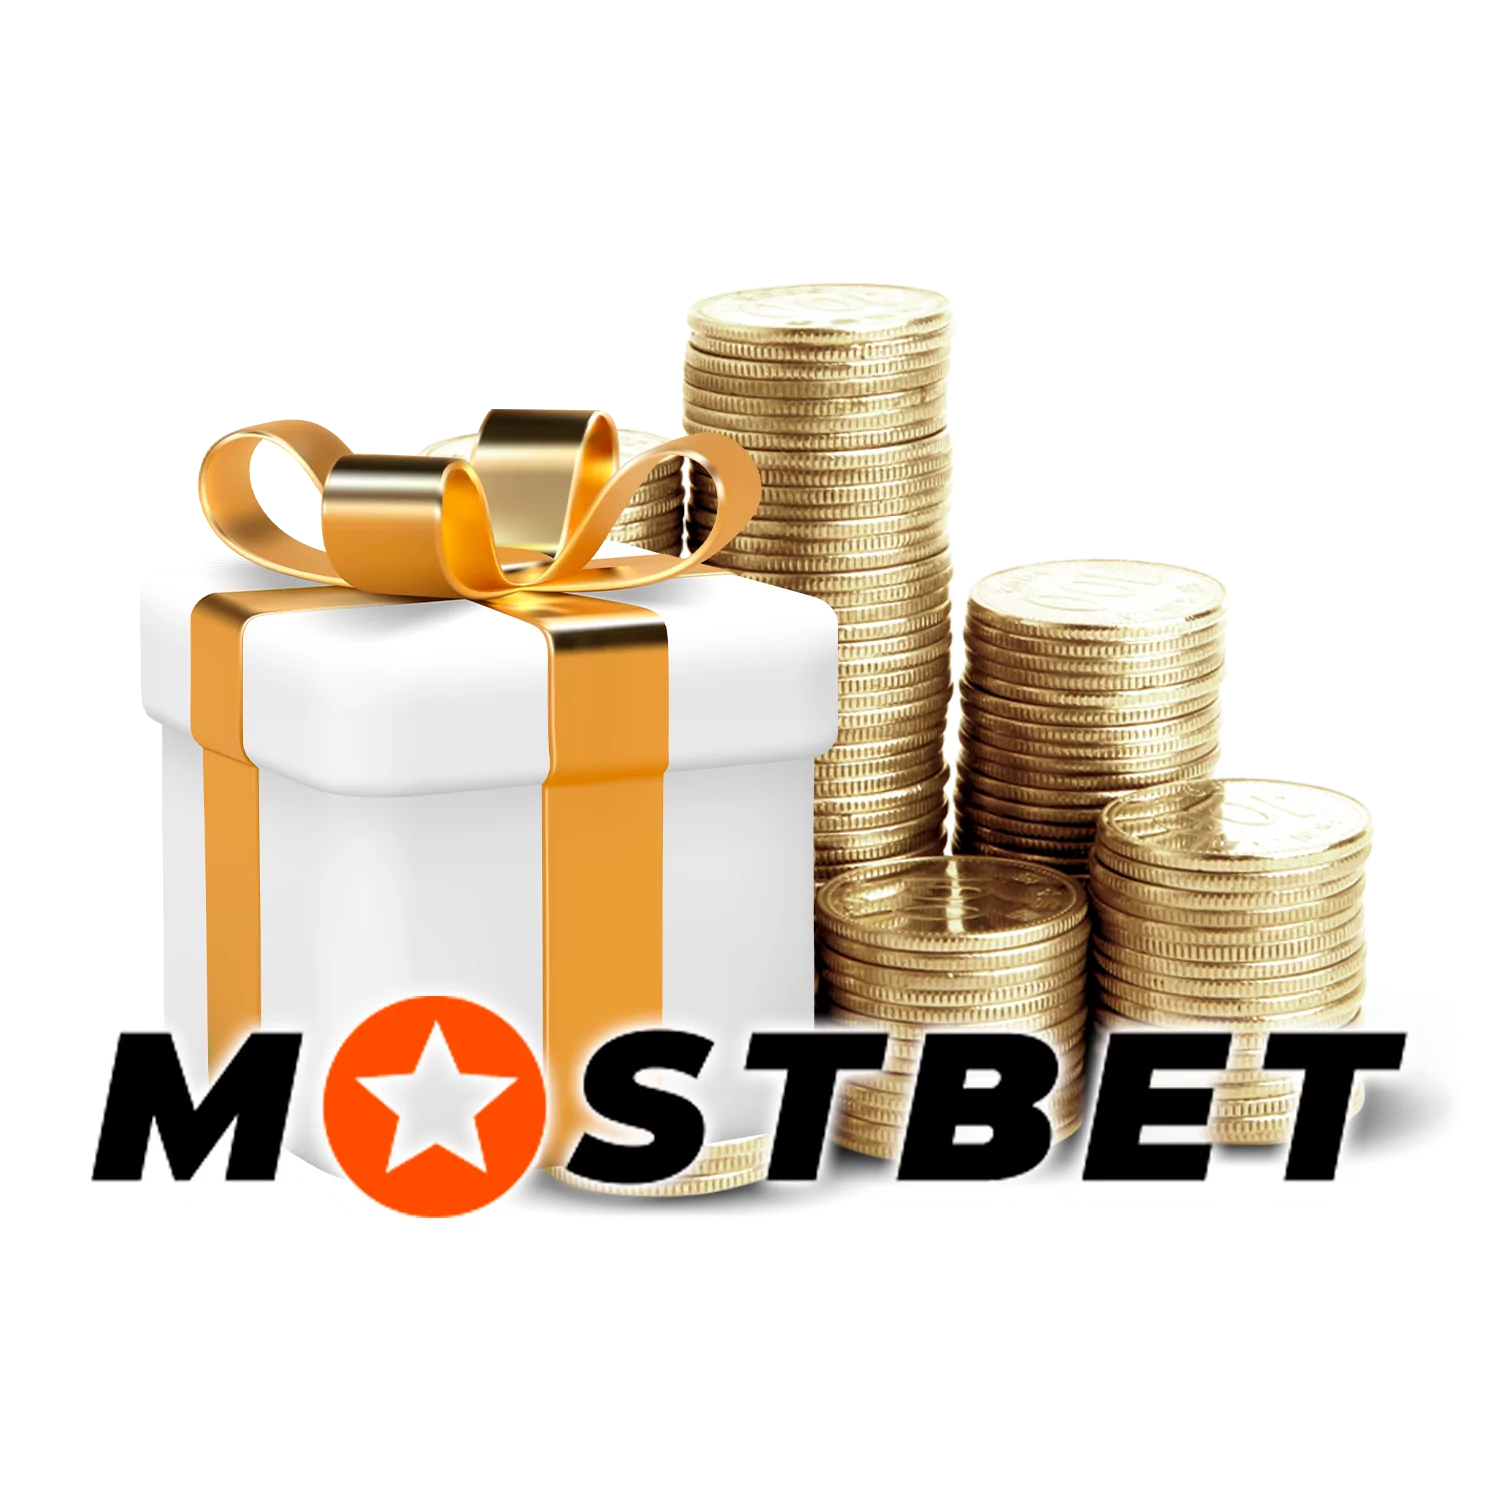 Learn how to take part in bonus programs and increase your profit from betting at Mostbet.